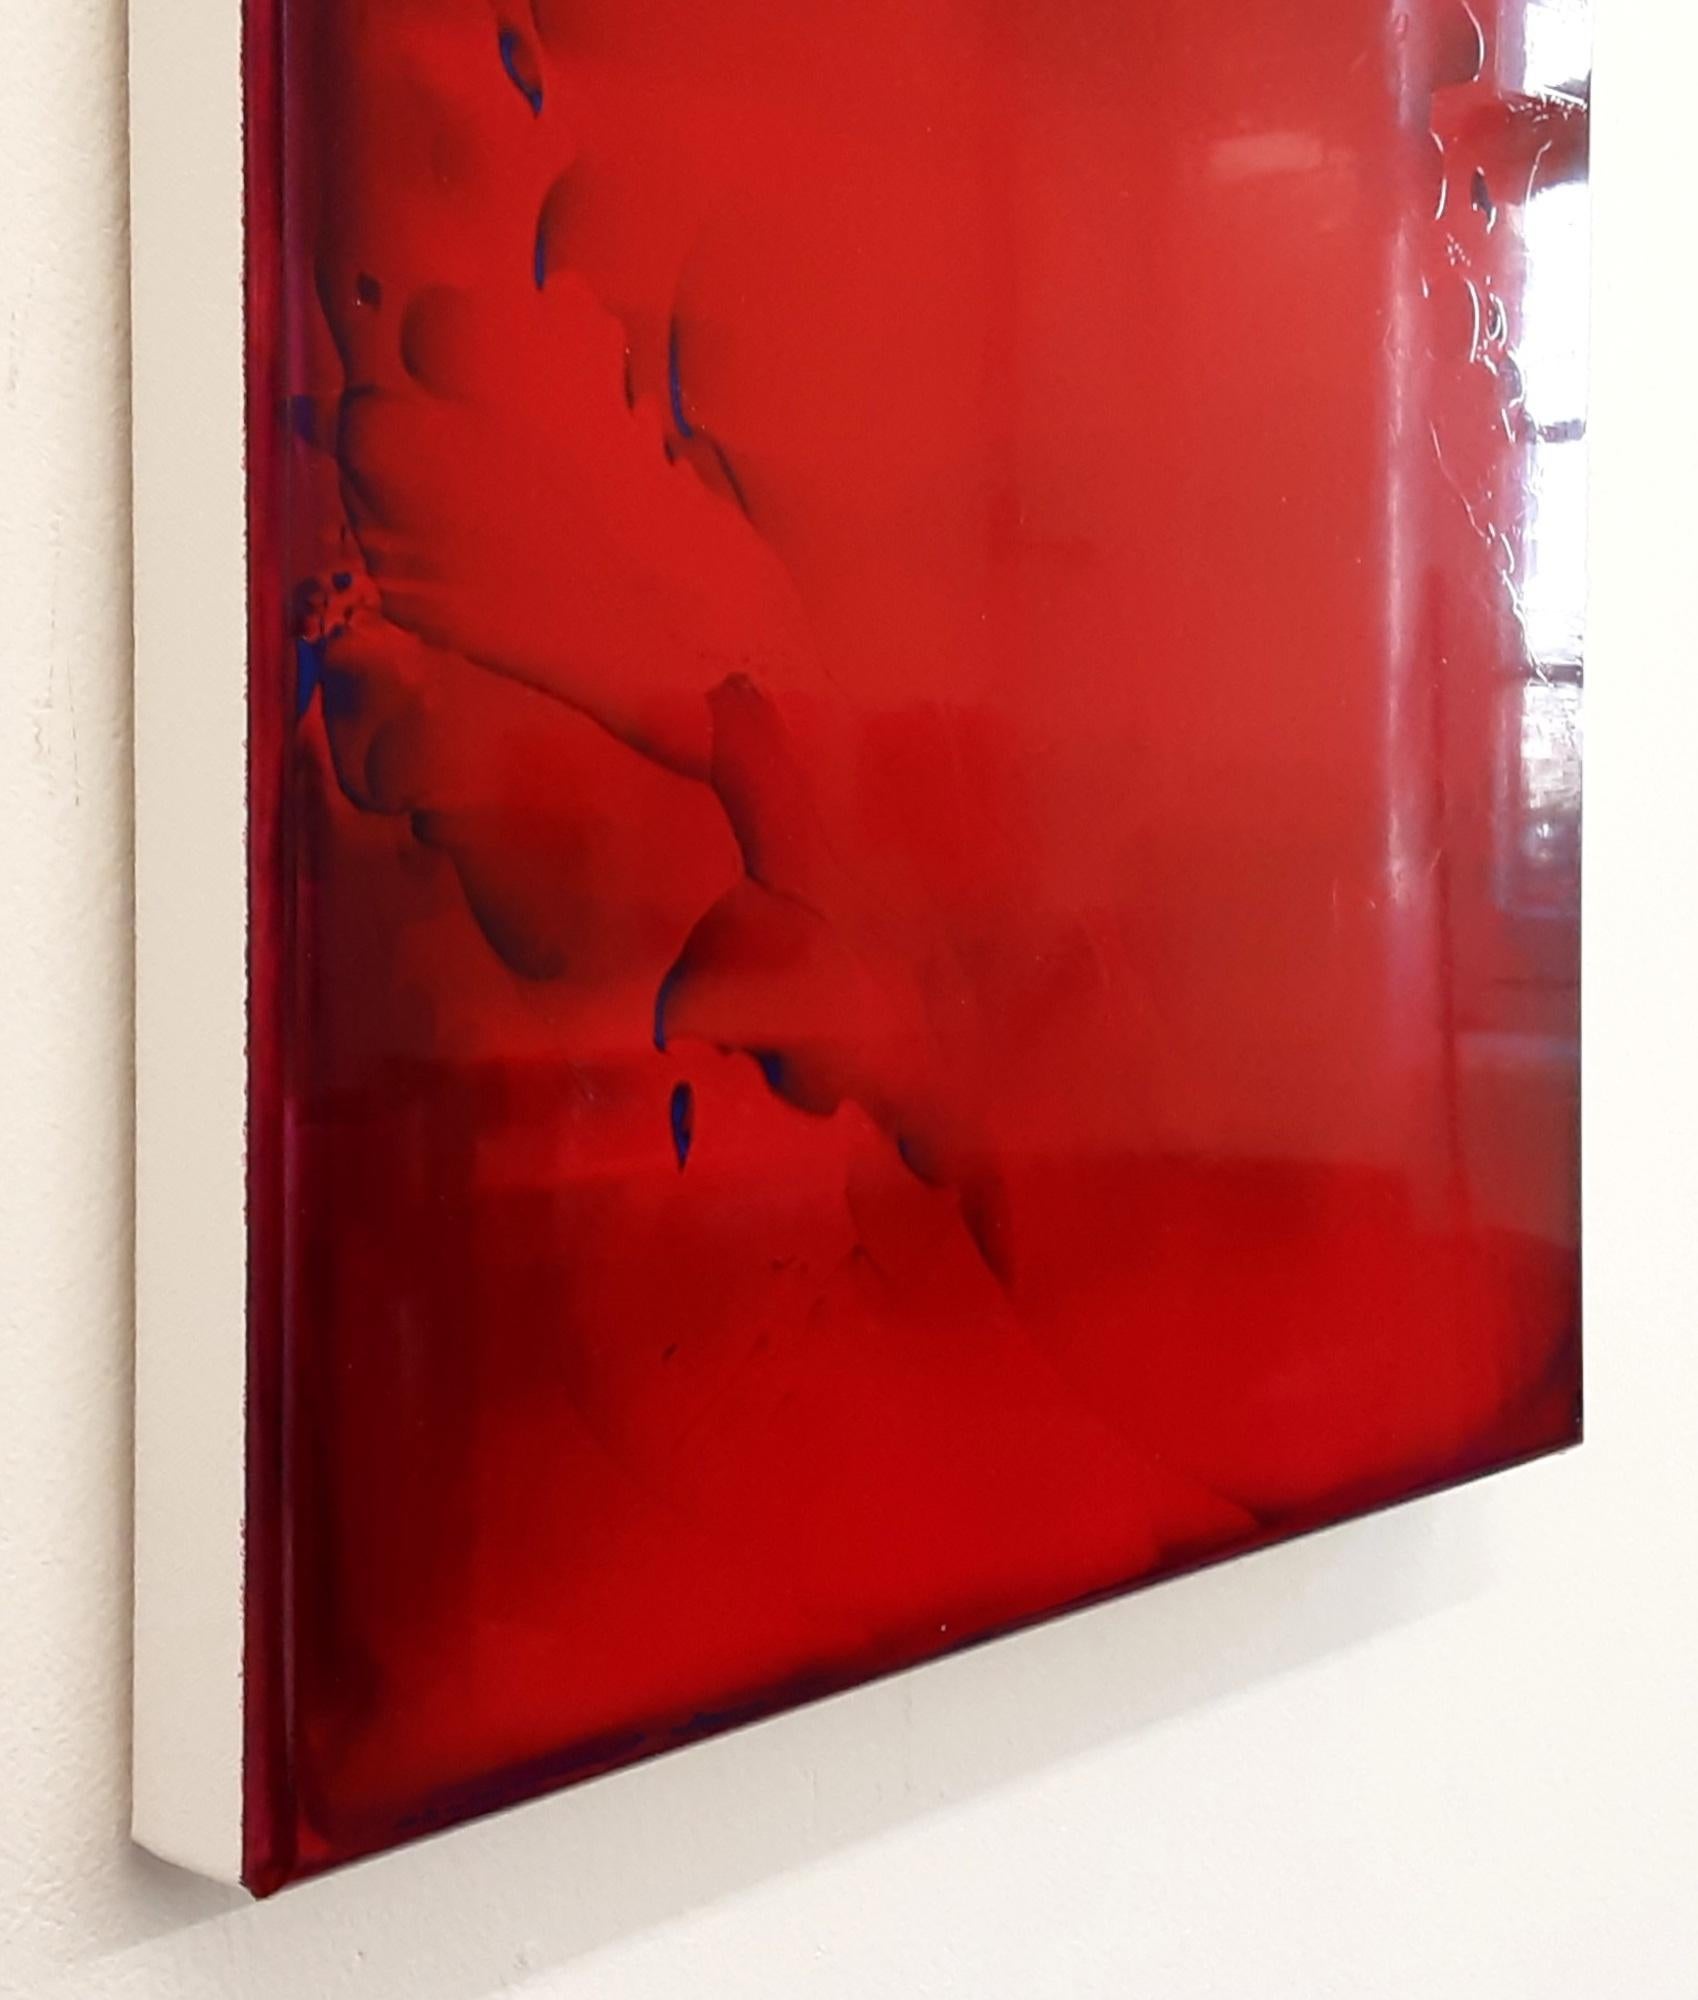 Resonance (3/21) by James Lumsden - Abstract colour painting, deep red For Sale 2